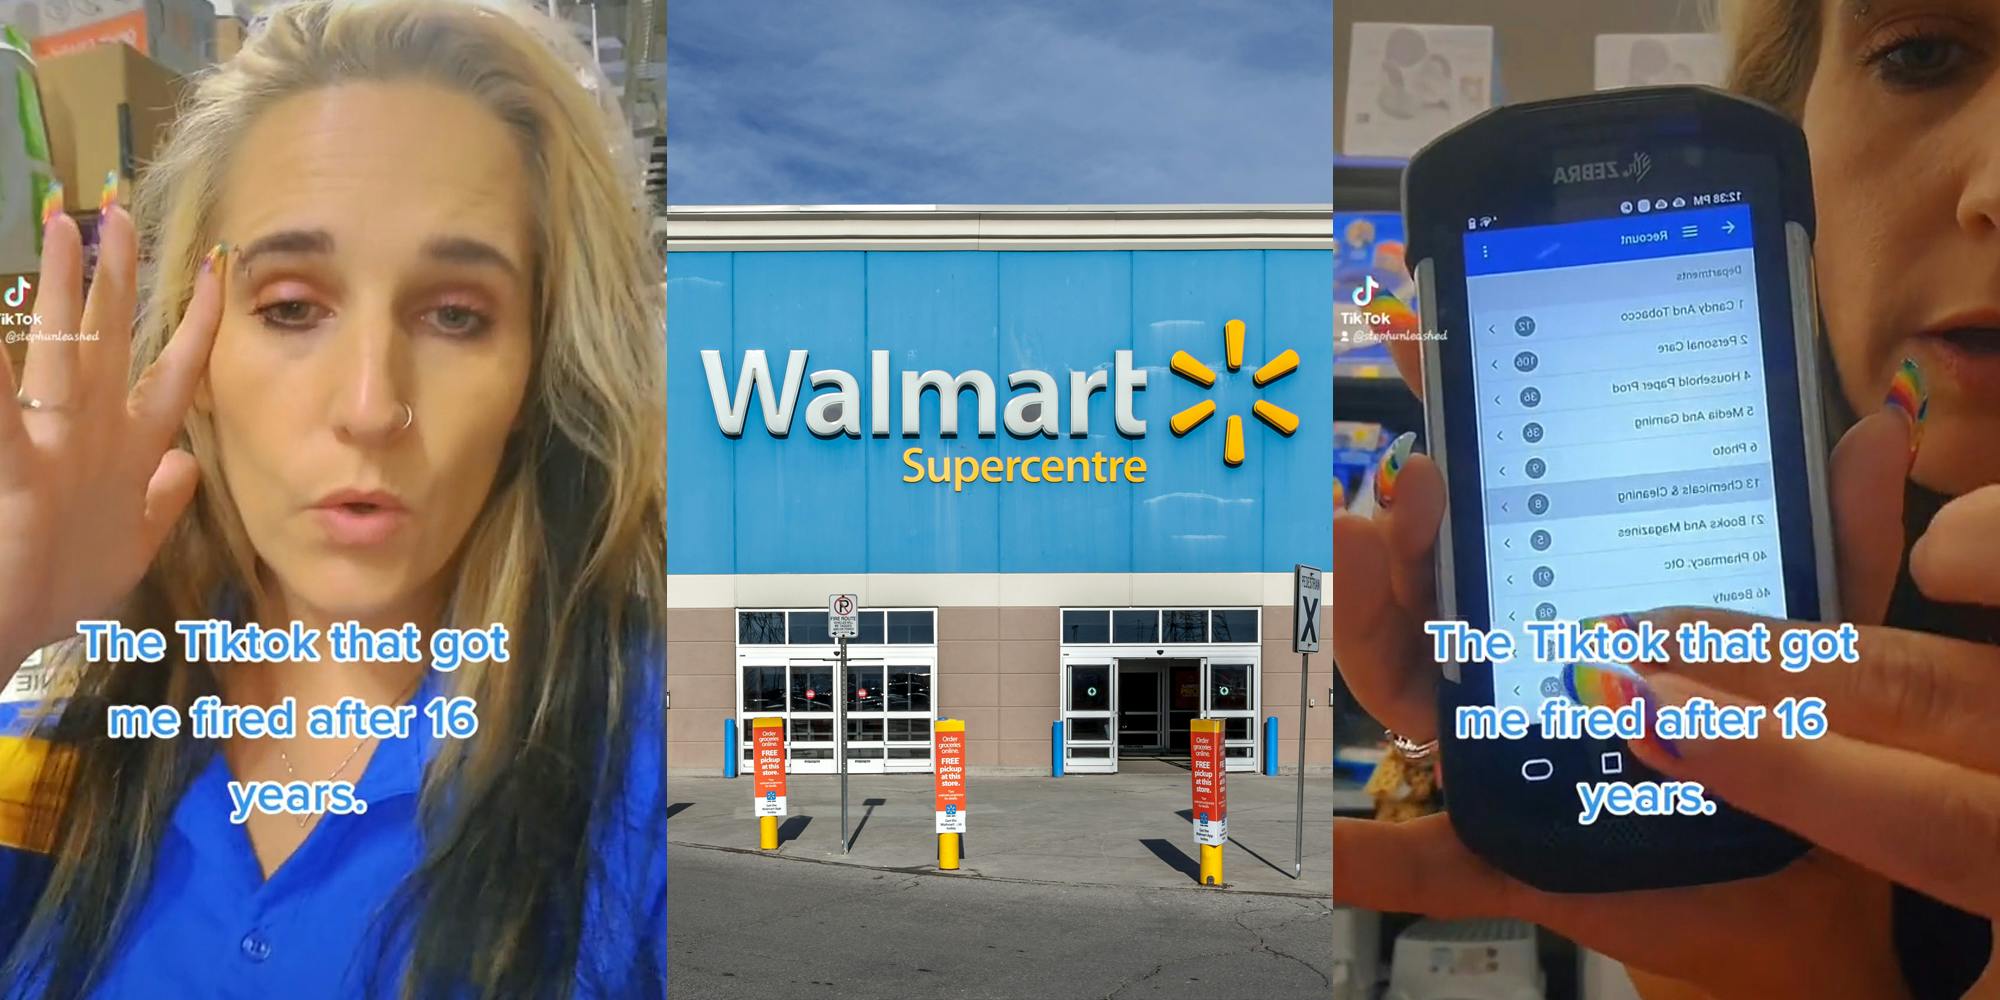 Walmart employee speaking with hand up and caption "The TikTok that got me fired after 16 years." (l) Walmart sign on building with parking lot (c) Walmart employee speaking with hand on Zebra scanner and caption "The TikTok that got me fired after 16 years." (r)